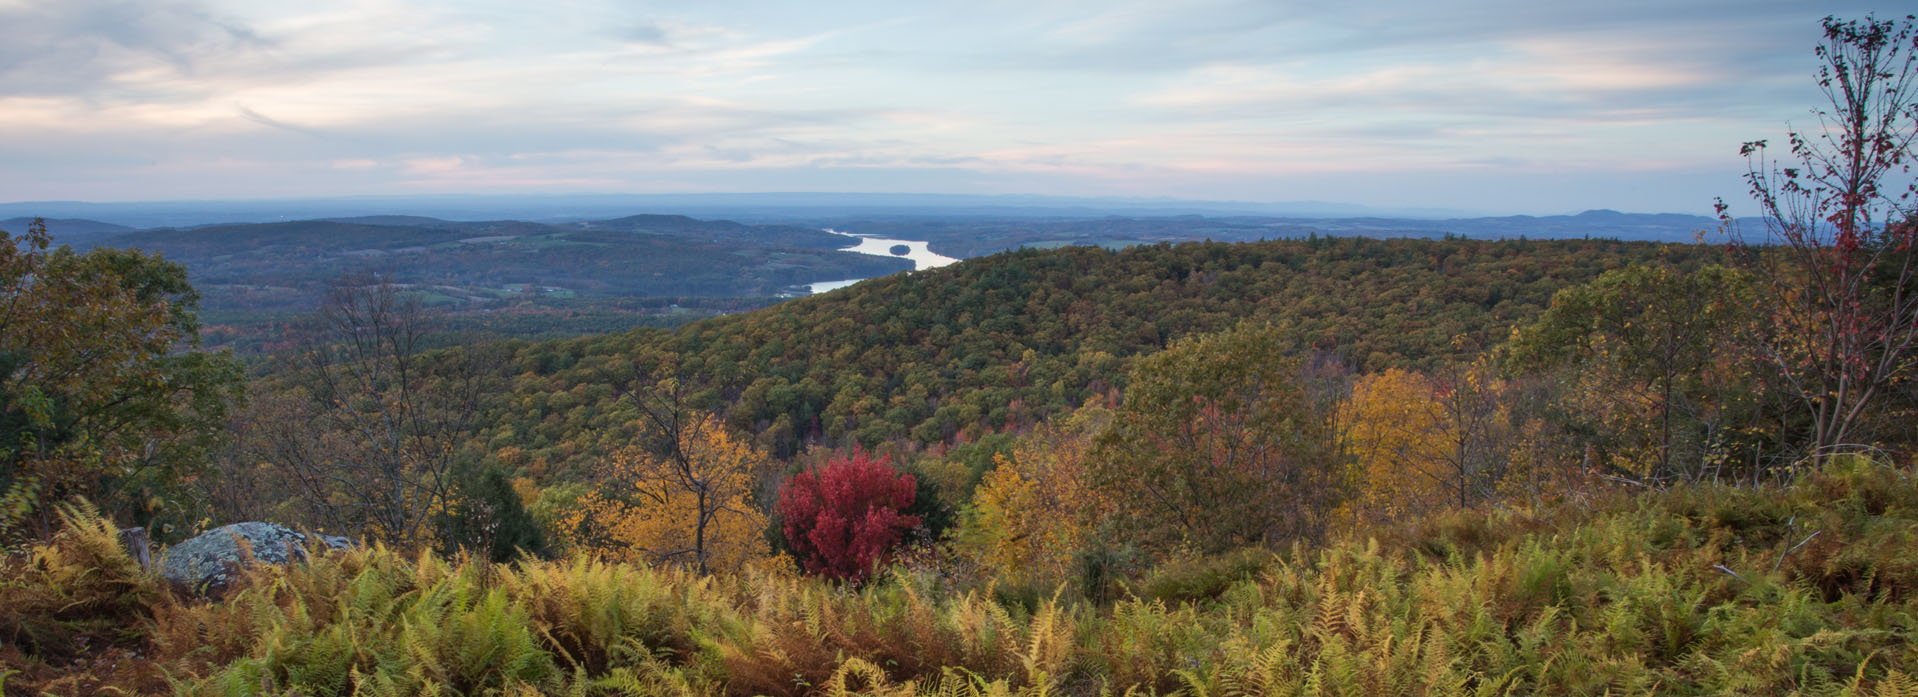 View of the Tomhannock Reservoir from the Rensselaer Plateau across the watershed sm 